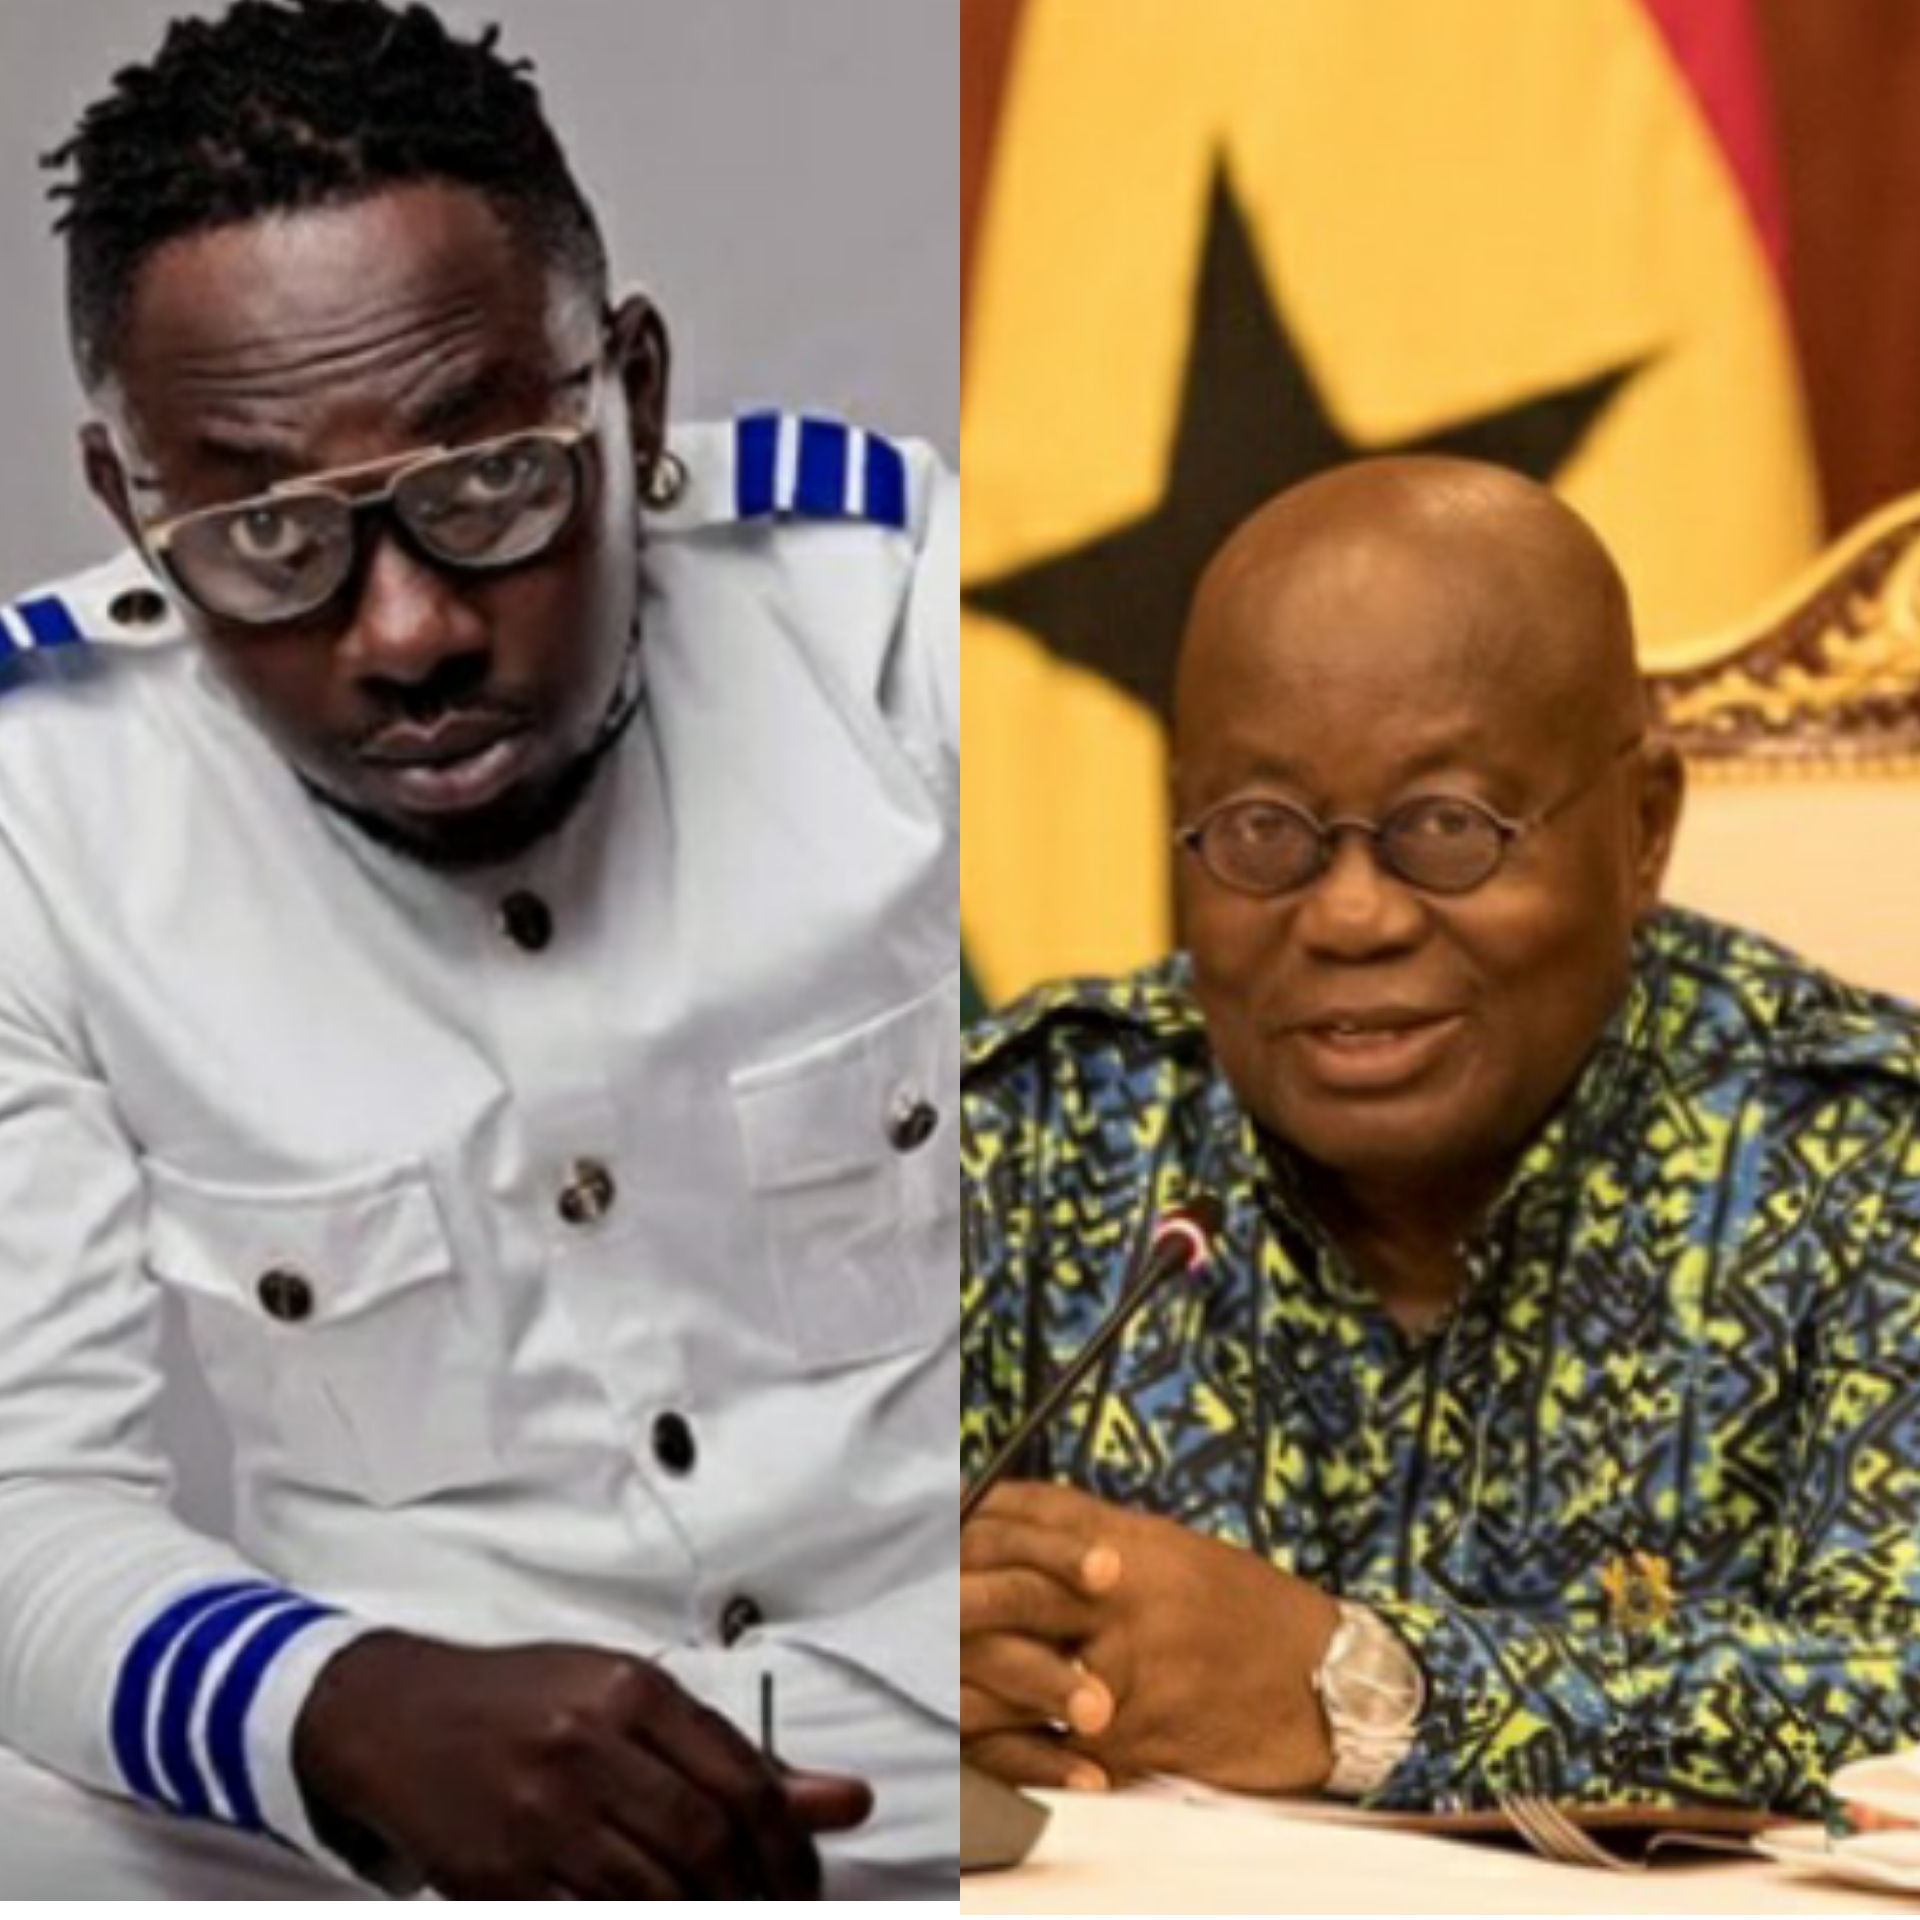 Choirmaster and President Akufo-Addo